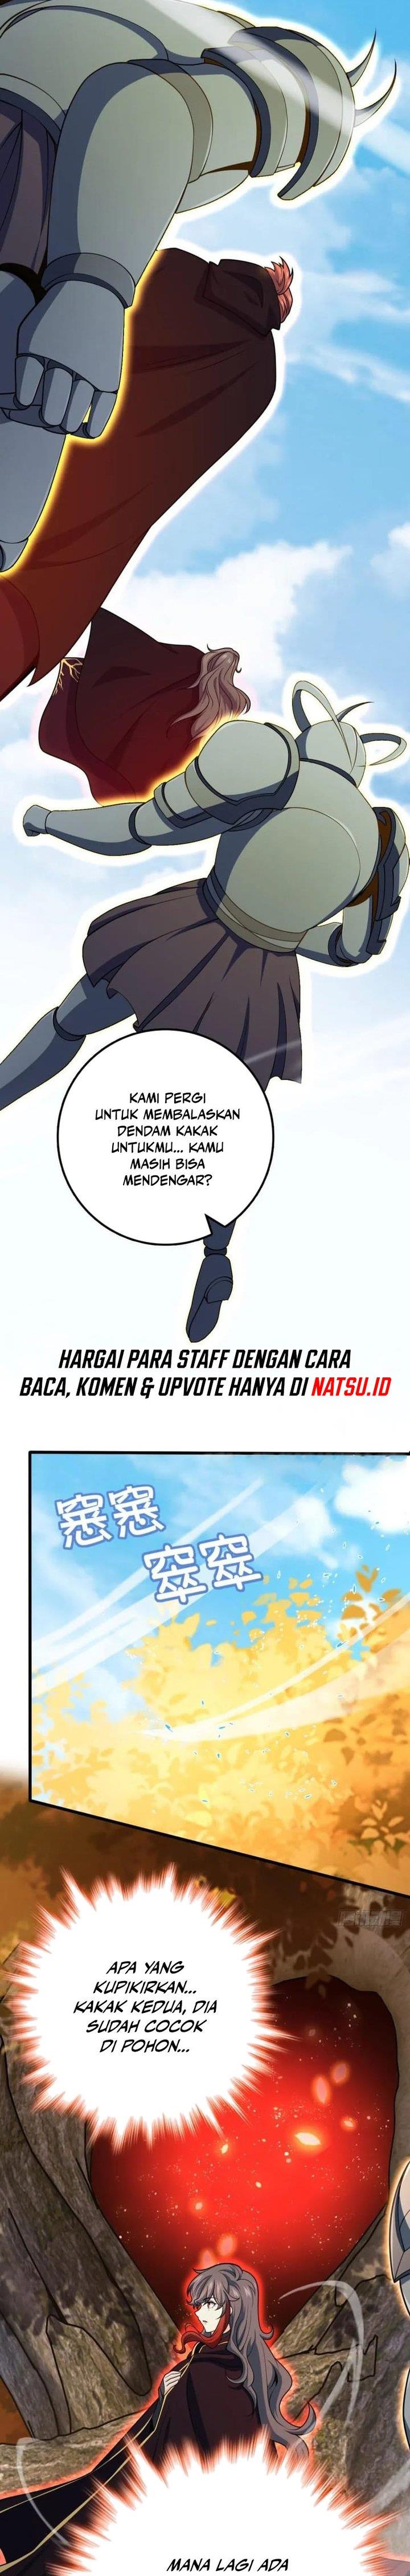 Spare Me, Great Lord! Chapter 488